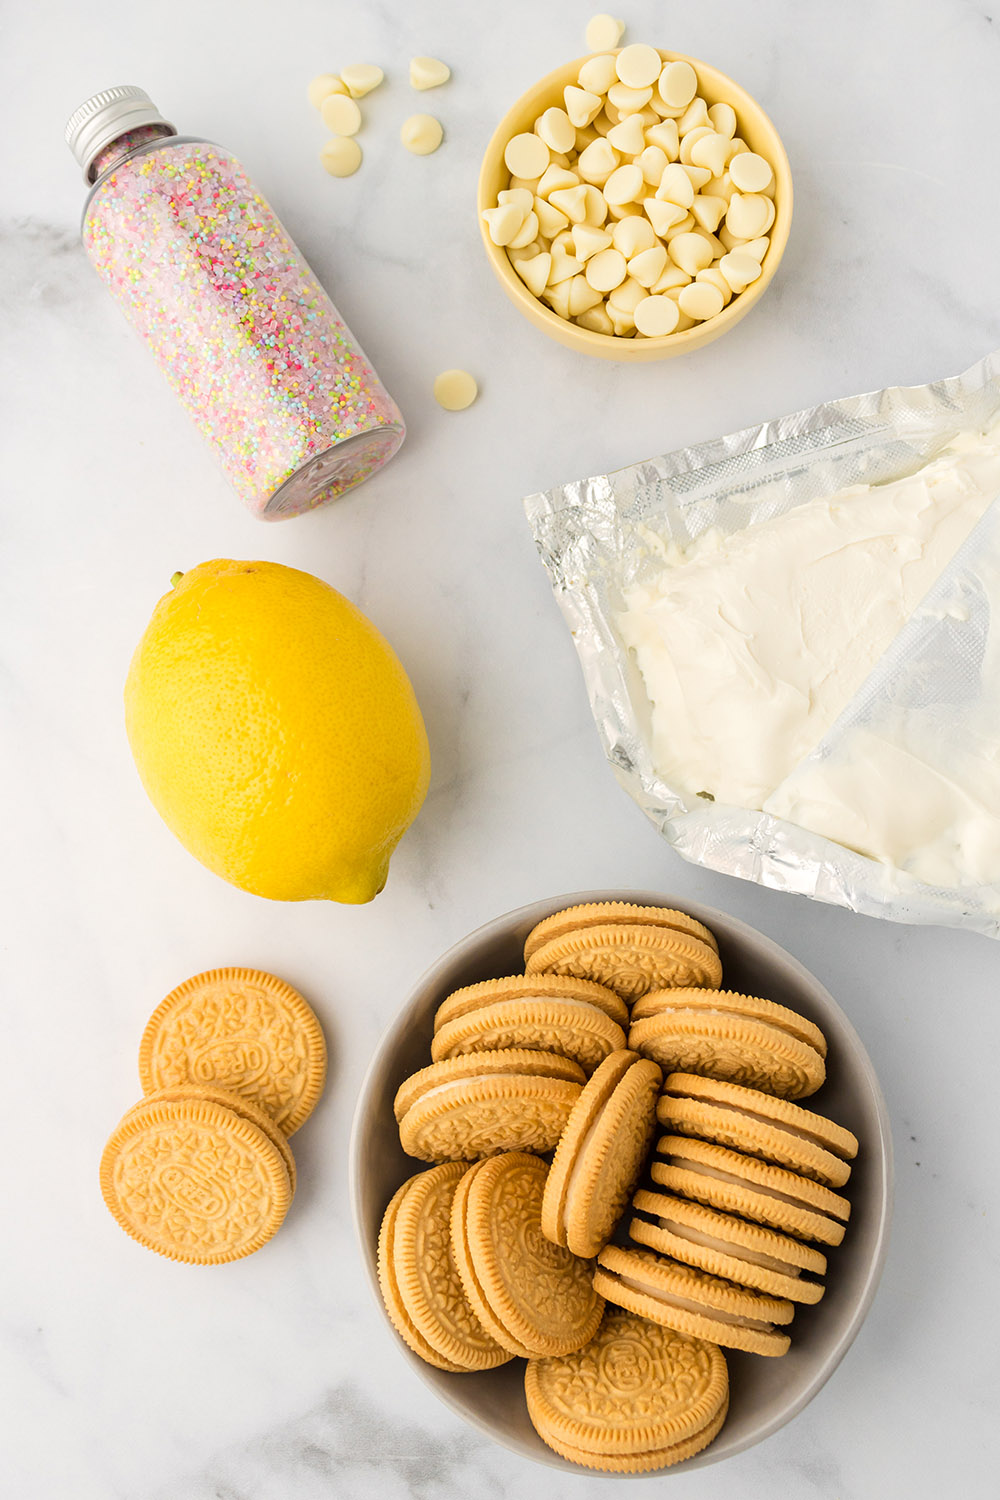 Cookies, lemon, cream cheese, and other ingredients for oreo balls.